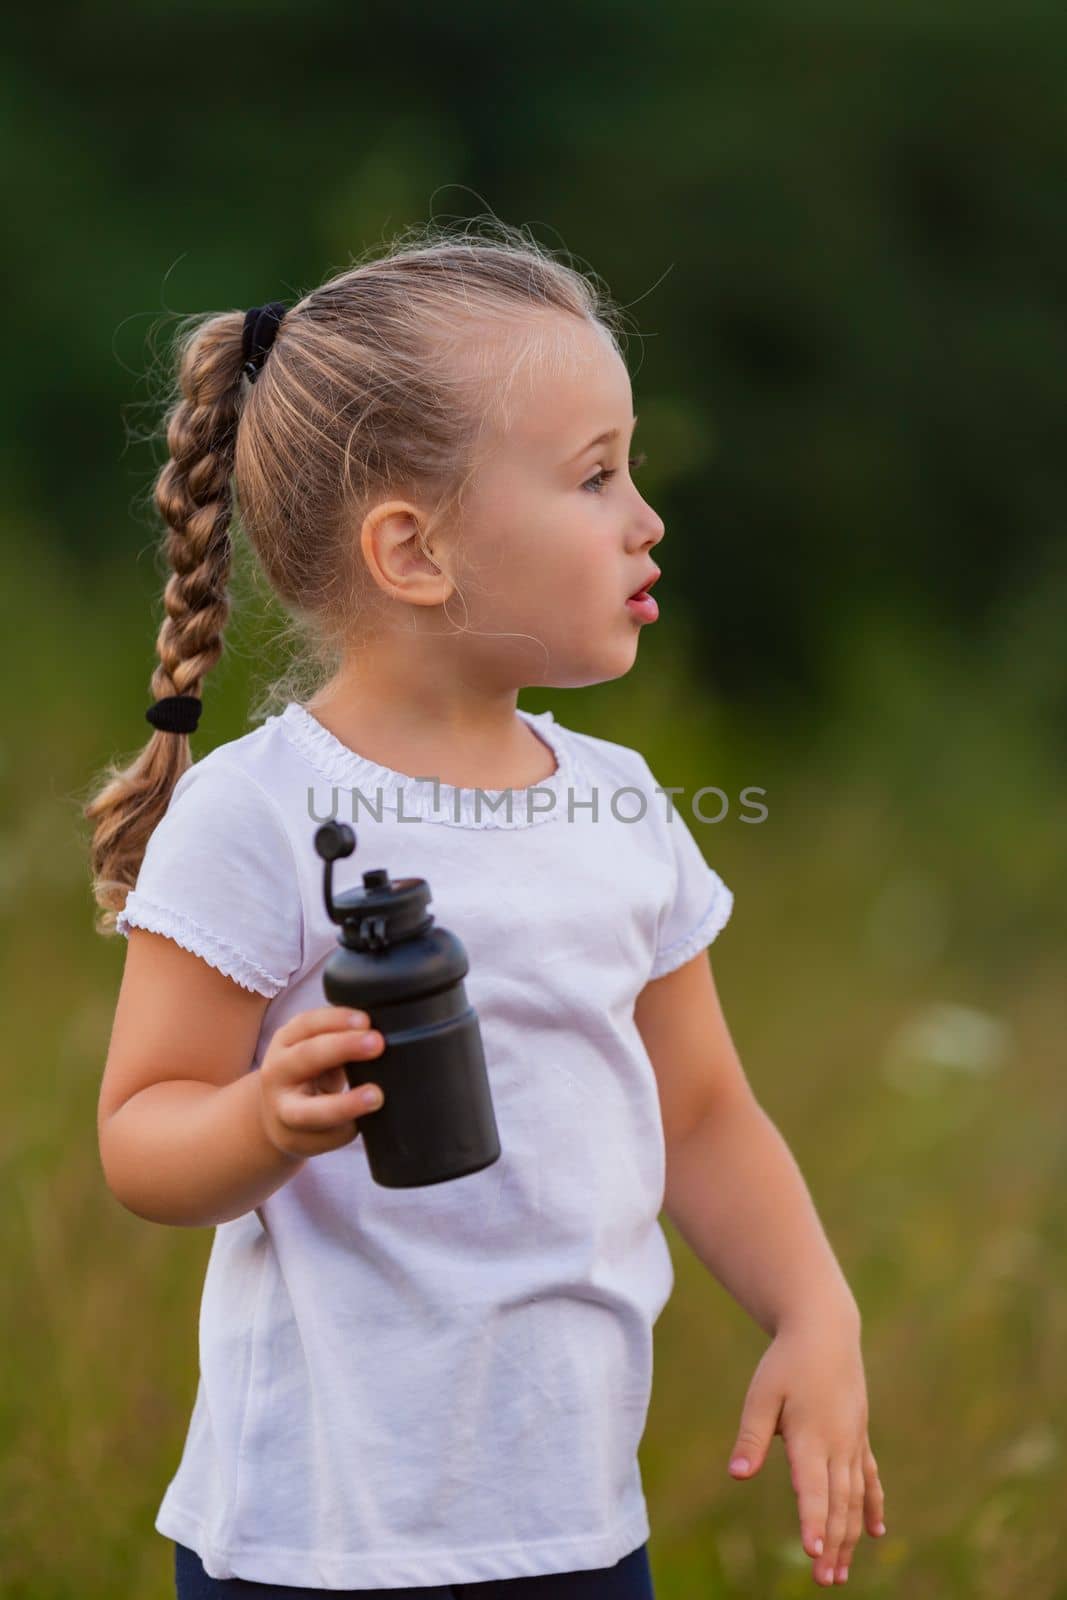 child drinking water from a bottle by zokov